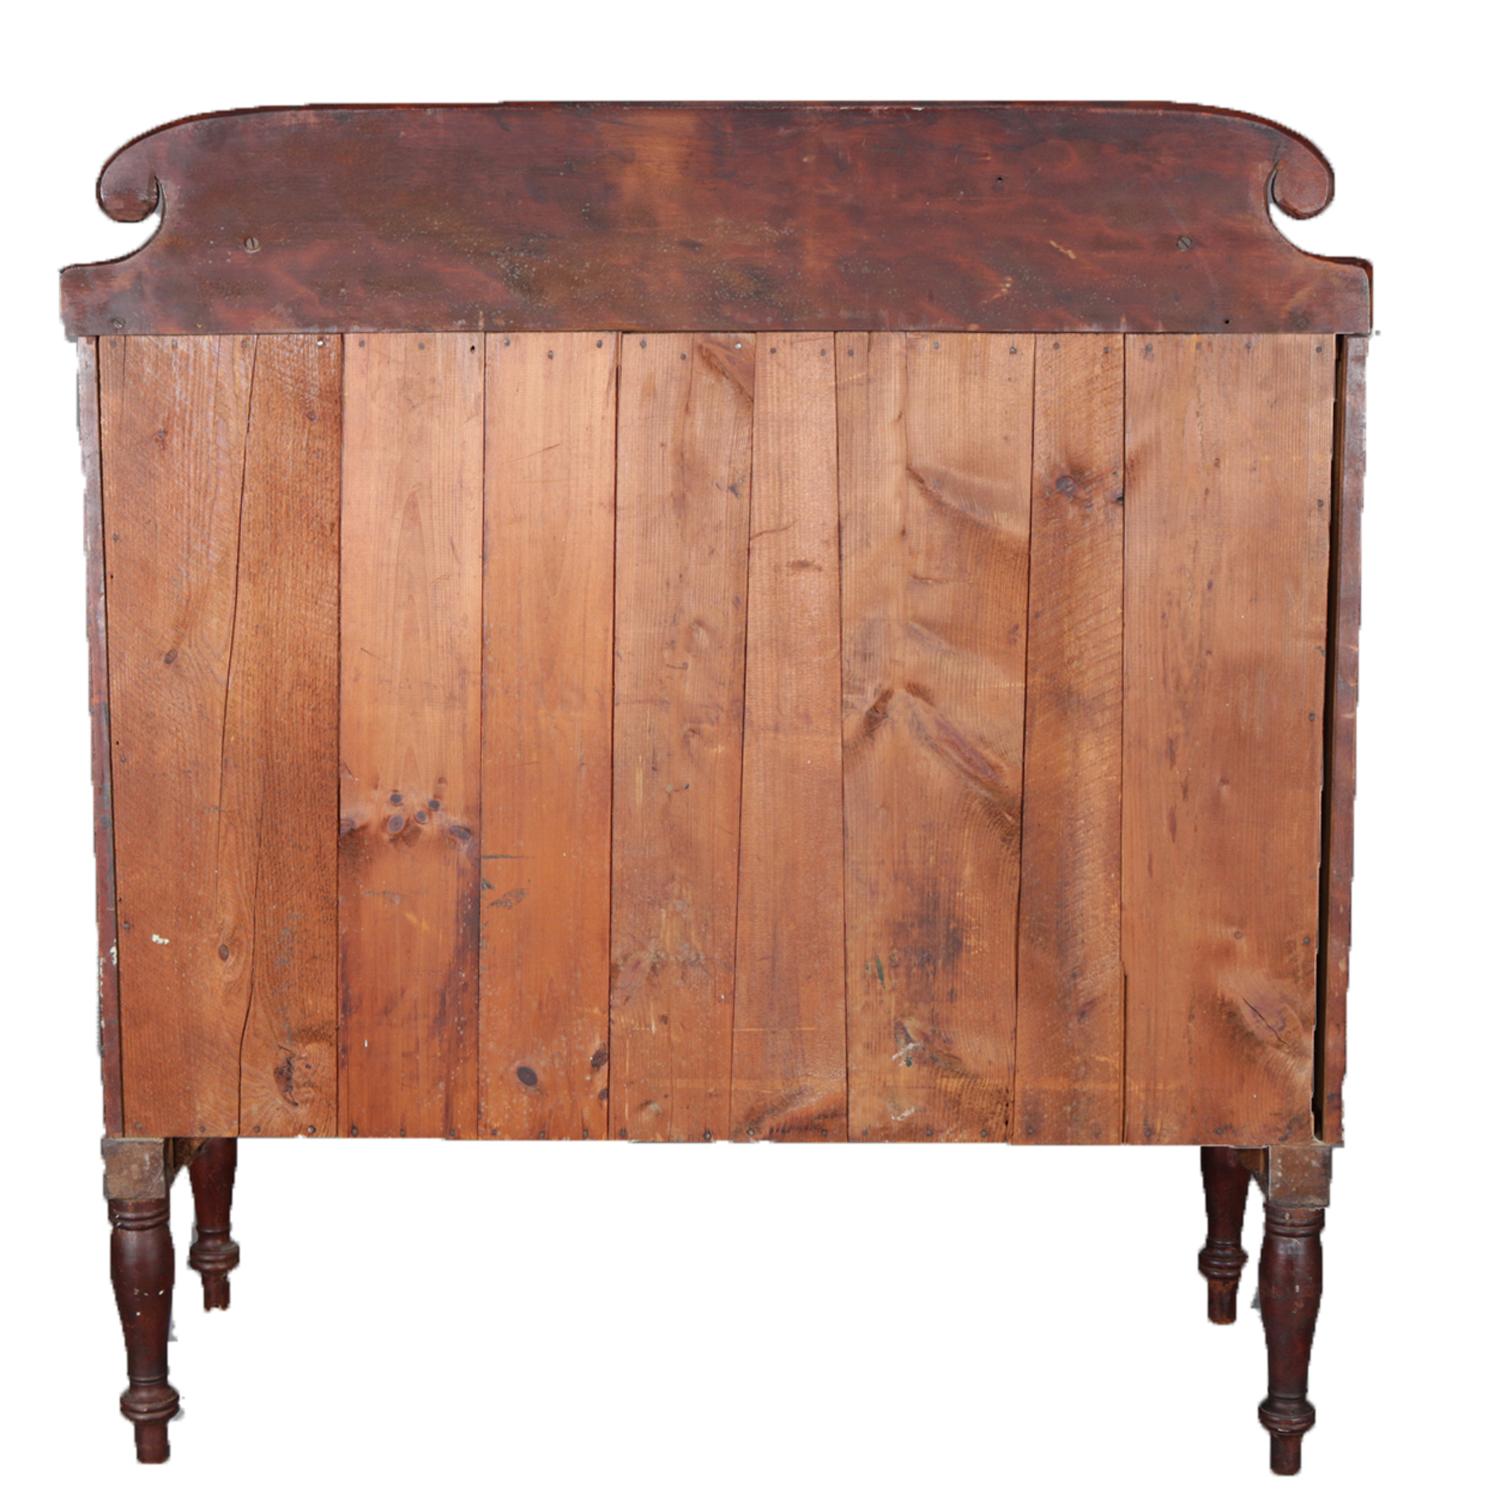 Cast Antique Flame Mahogany Sheraton Chest with Full Rope Twist Columns, circa 1830